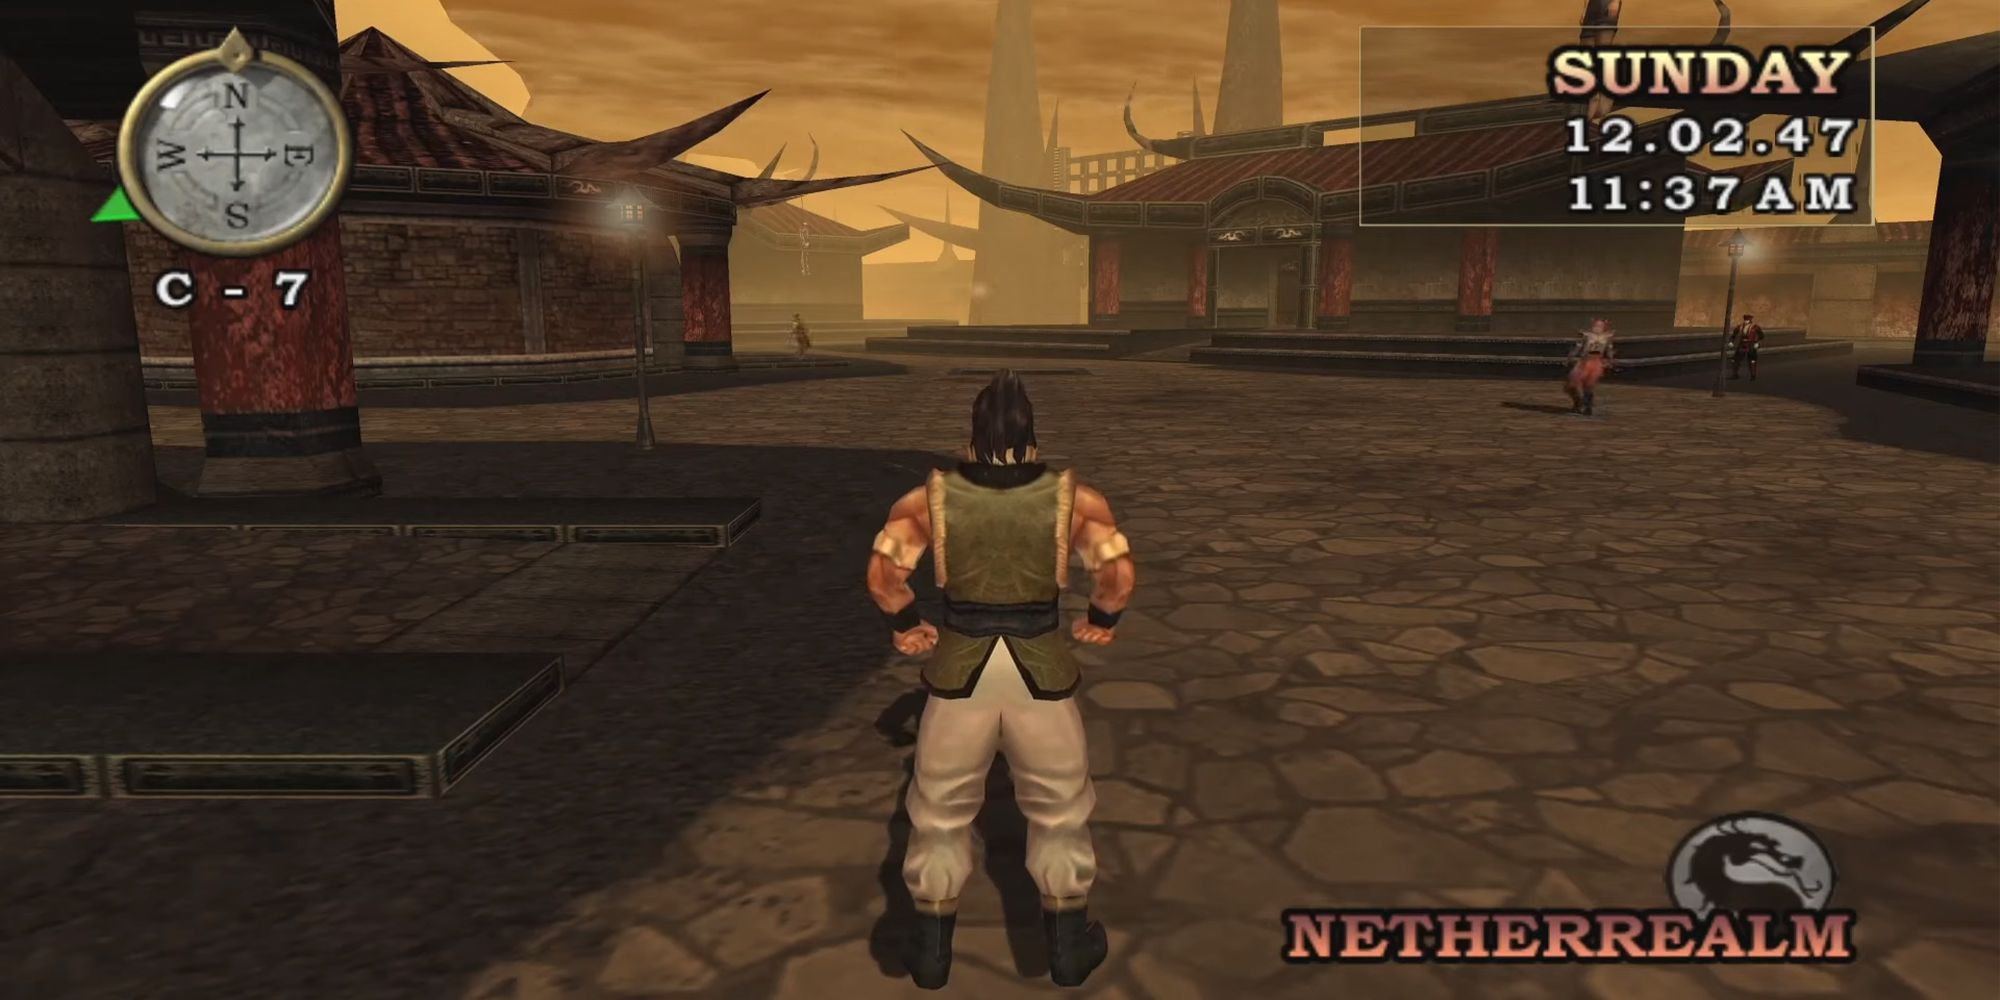 mortal kombat deception screenshot of the netherrealm in konquest mode with extended draw distance allowing the player to see more buildings in the distance